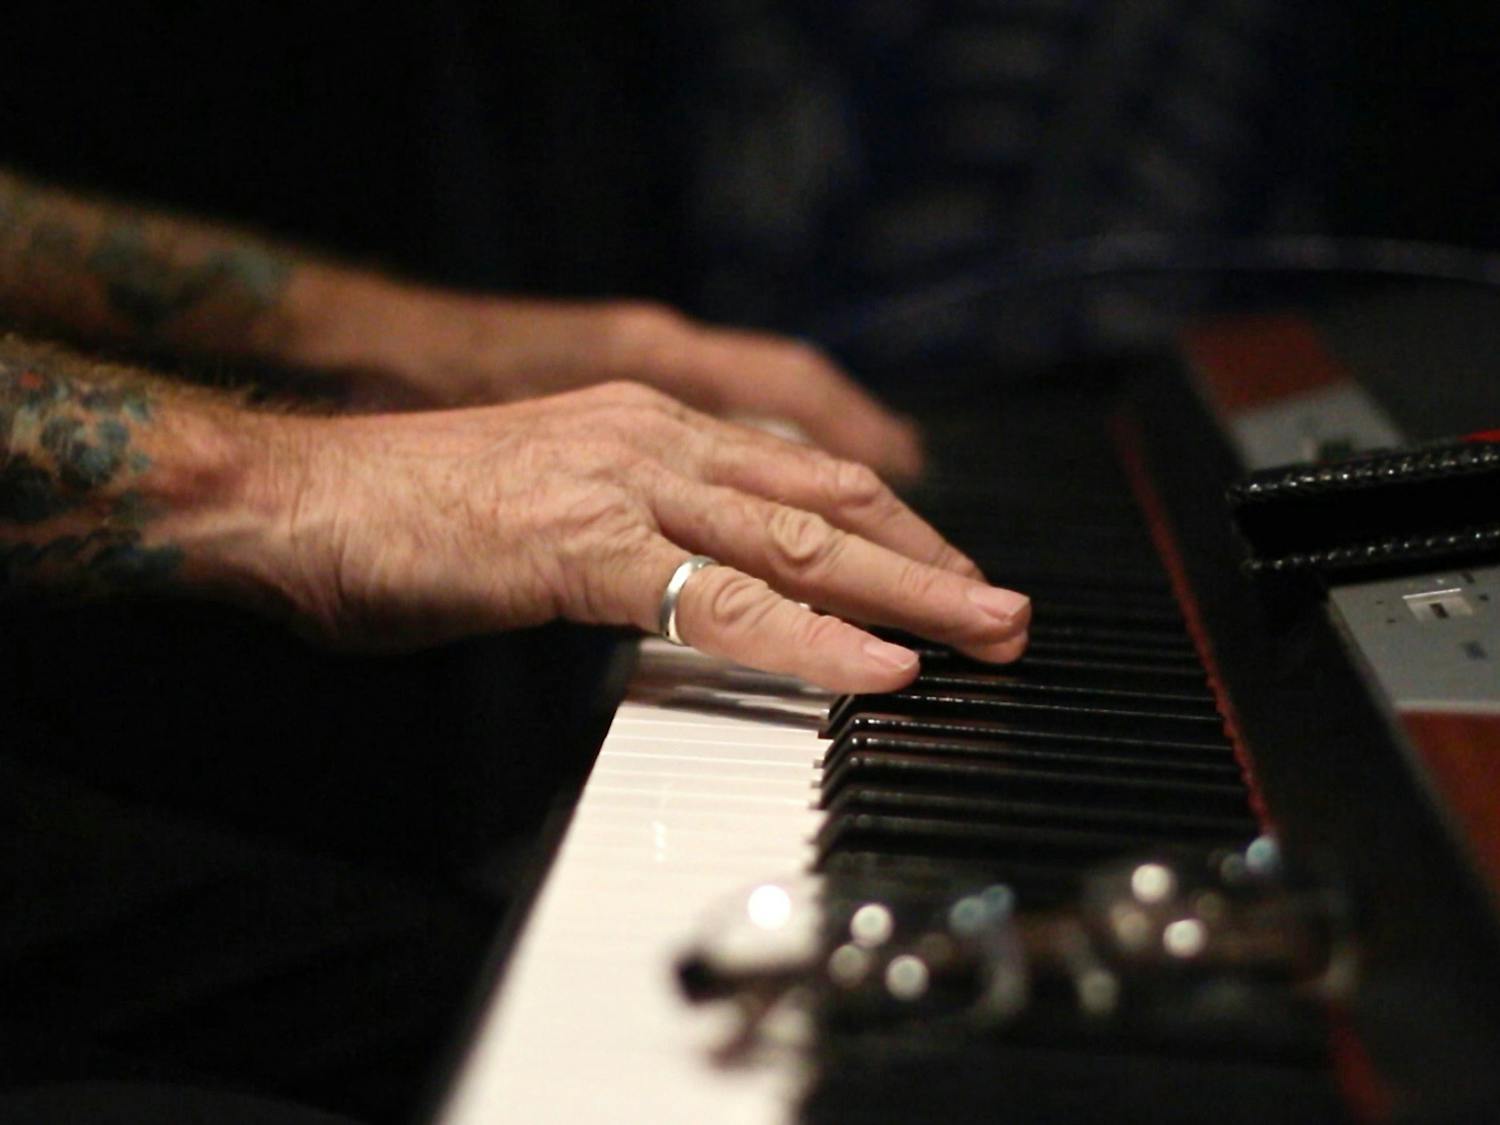 Rev. Billy C. Wirtz, a 62-year-old typically solo pianist, Tampa DJ and Ocala resident, warms up on his keyboard for Willie Green’s band performance in the Phillips Center’s Squitieri Studio Theatre on Wednesday before his performance today. Wirtz said blues was considered “devil music.” “Gospel says no matter how bad things get, with a little bit of hope, things will get better,” he said, while “blues says don’t count on it.”